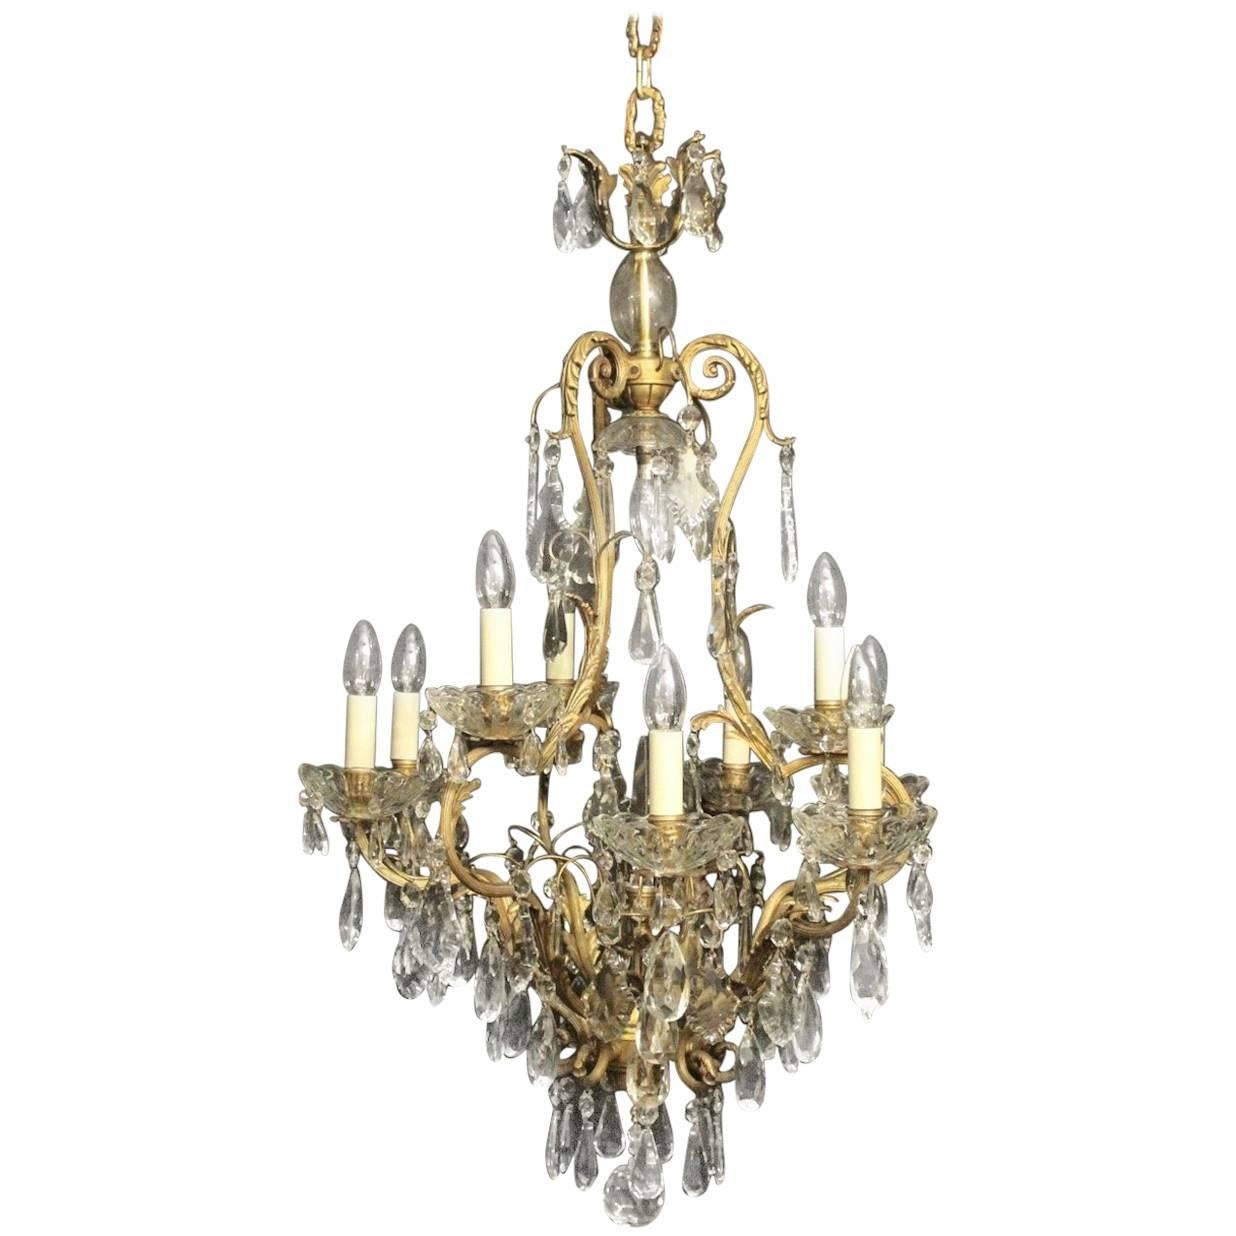 French Gilded Bronze and Crystal Ten-Light Antique Birdcage Chandelier